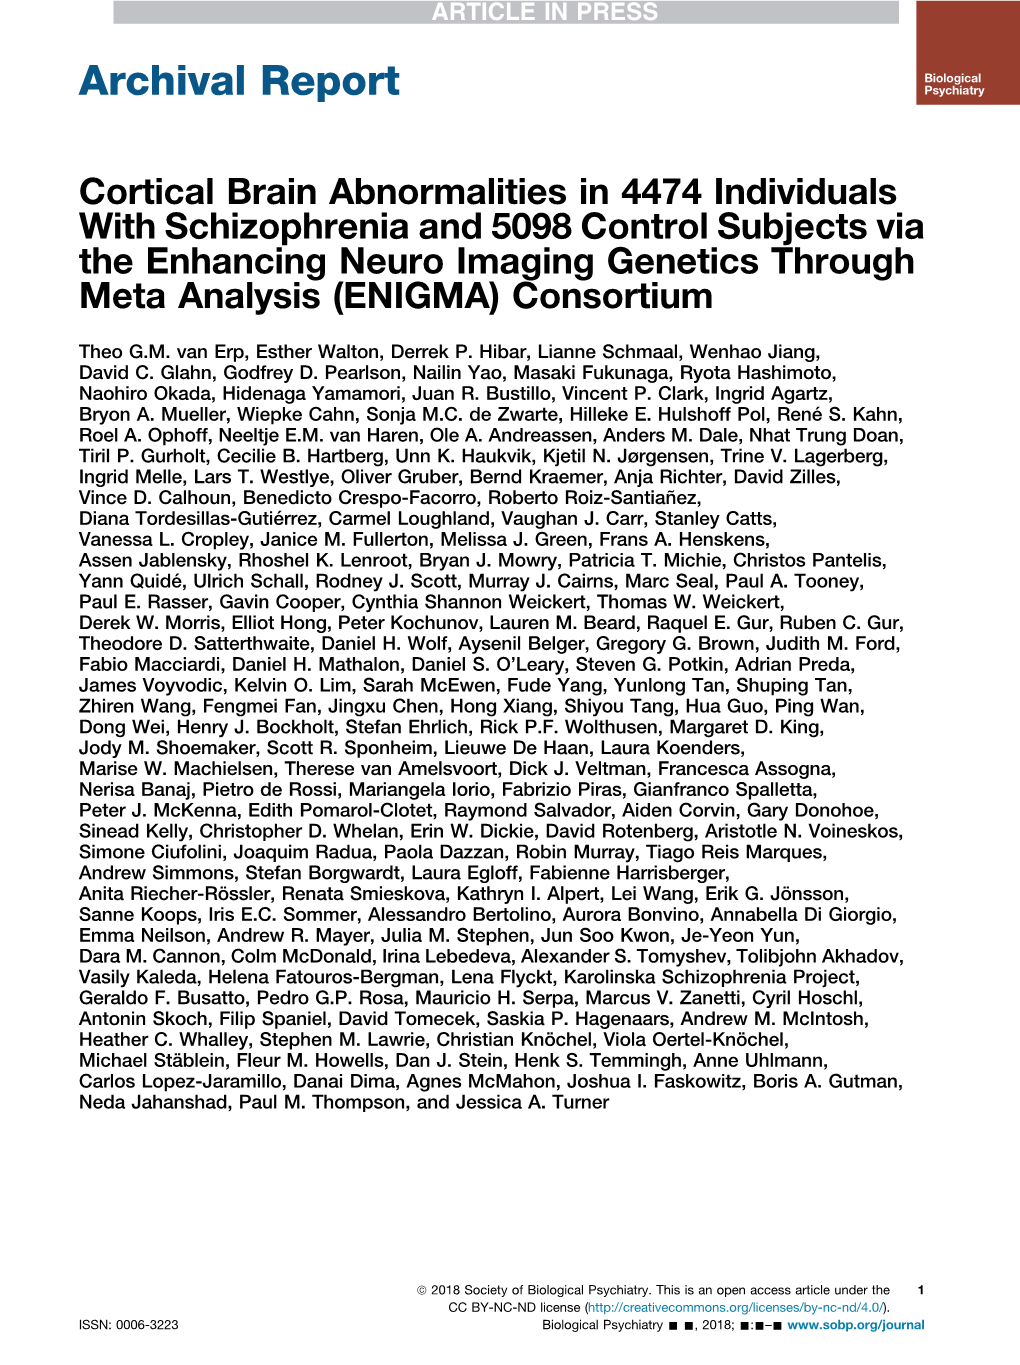 Cortical Brain Abnormalities in 4474 Individuals with Schizophrenia and 5098 Control Subjects Via the Enhancing Neuro Imaging Ge